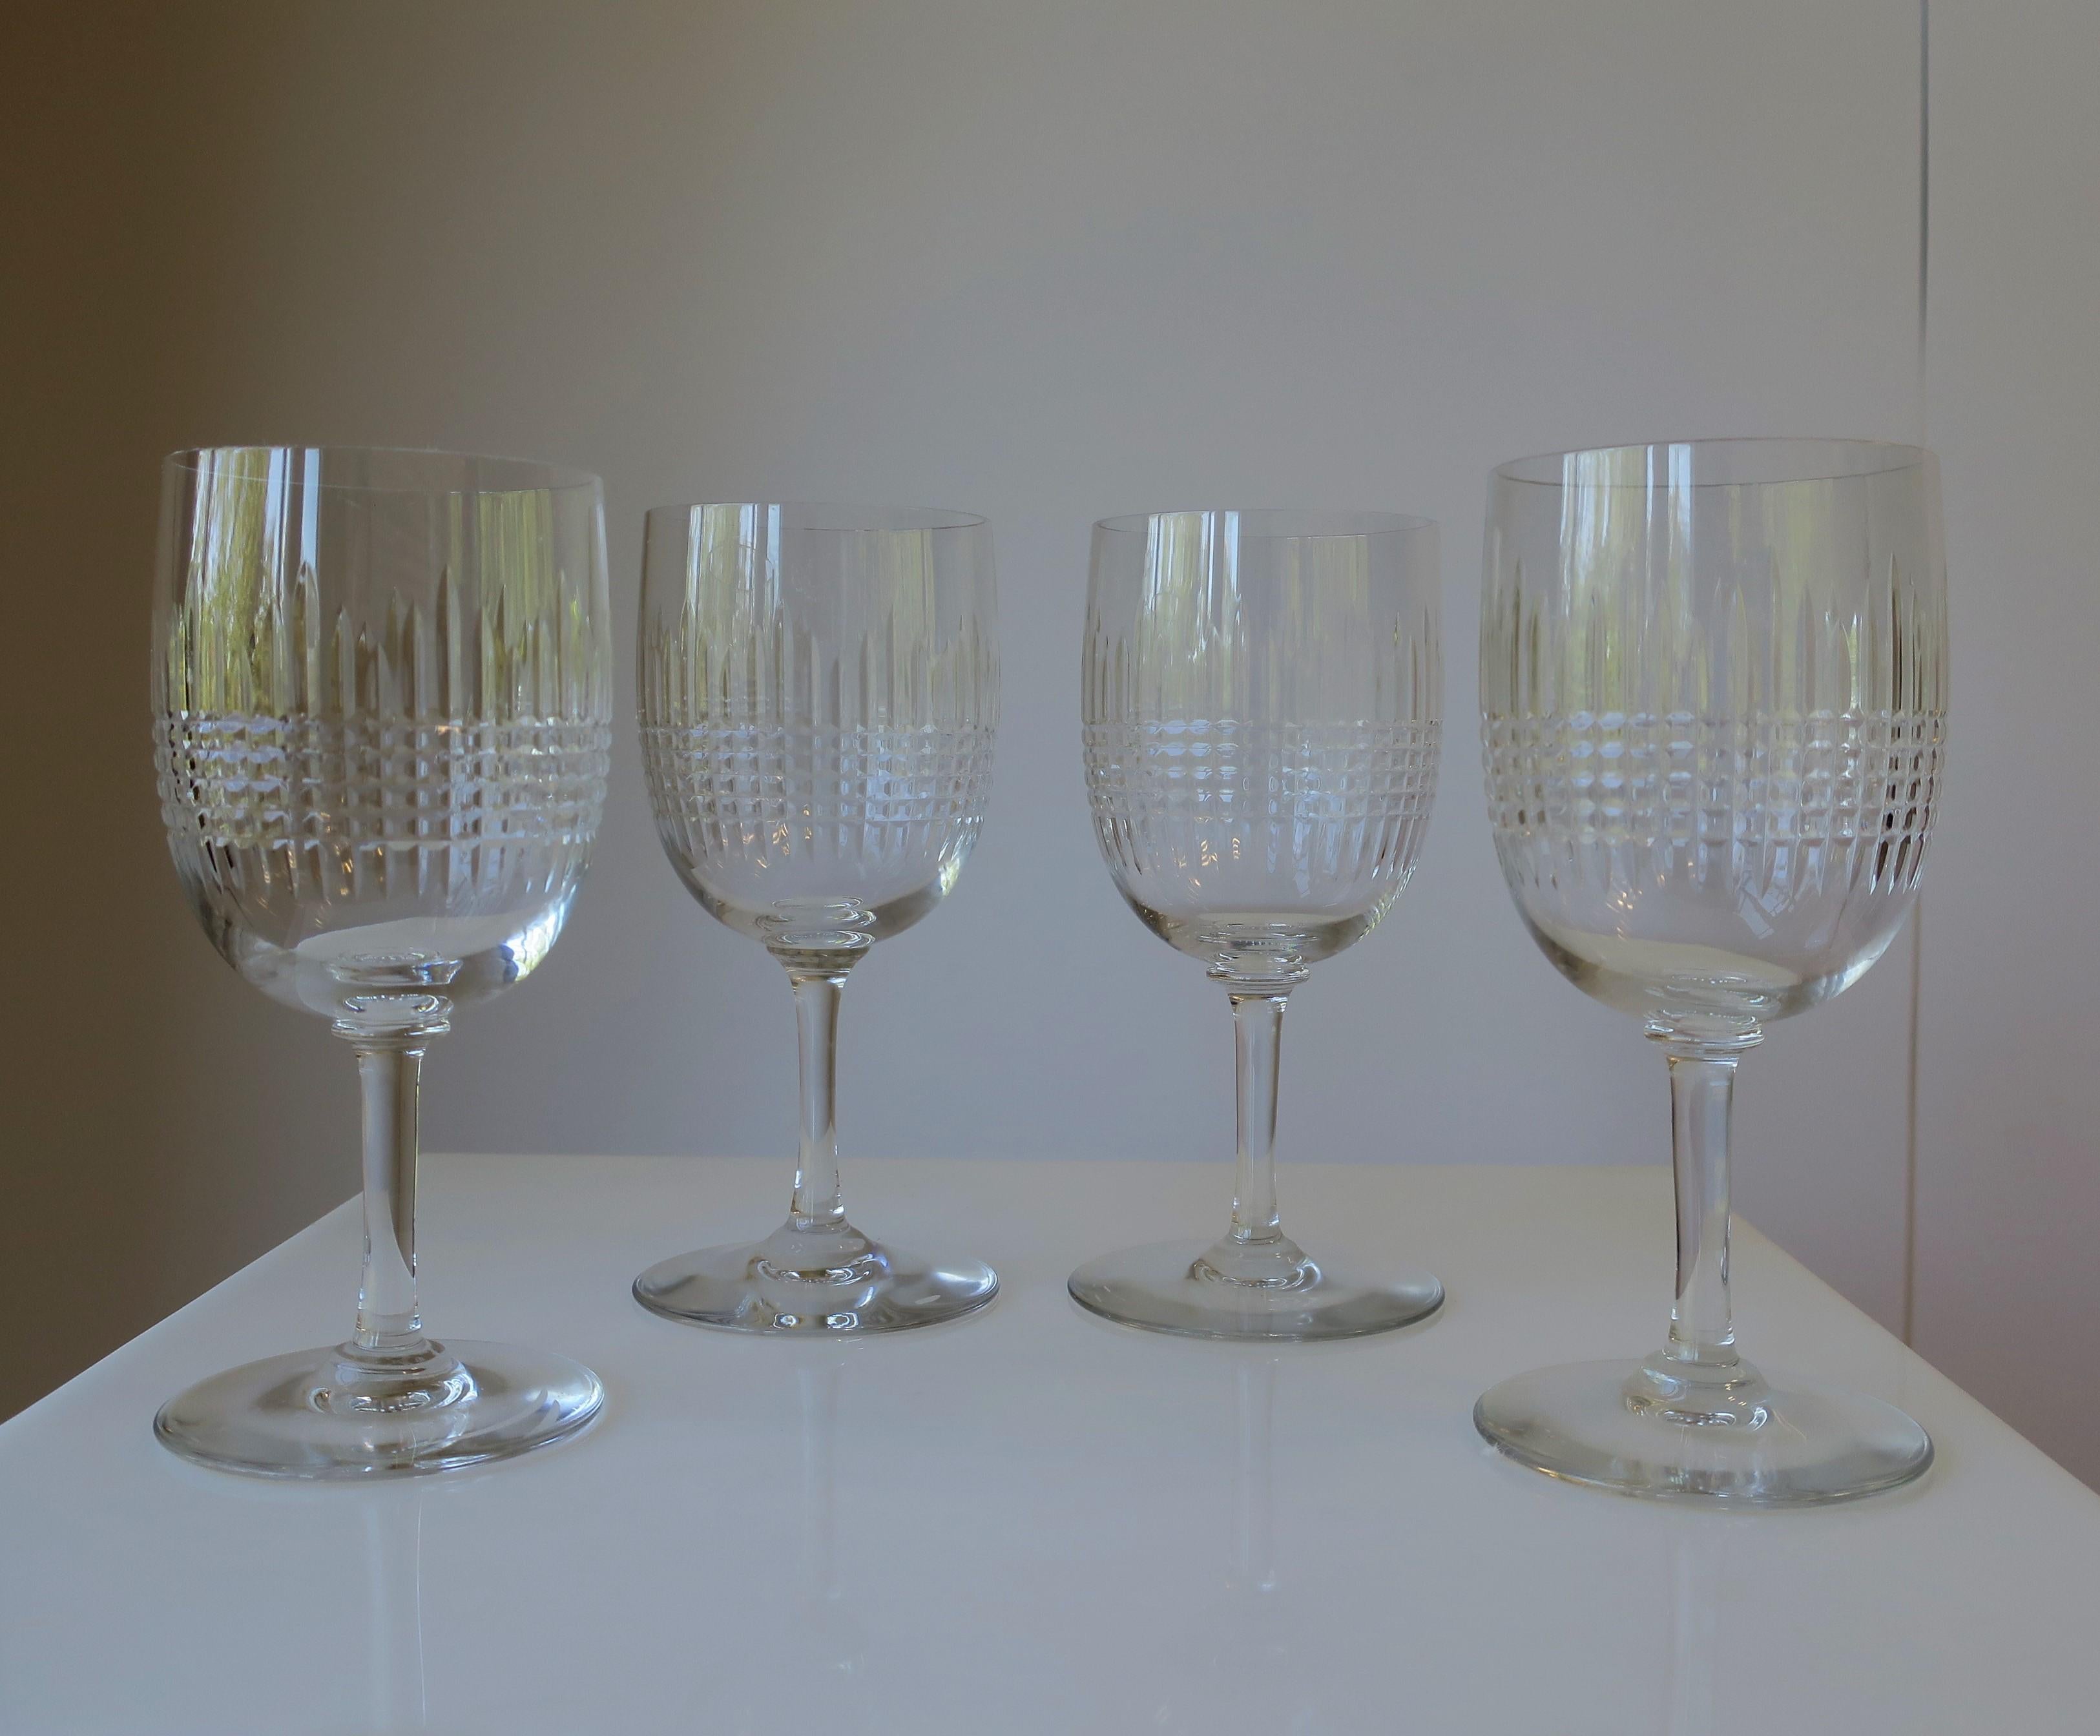 20th Century Set of 4 Baccarat French Cut Crystal Wine Glasses, 8 Available